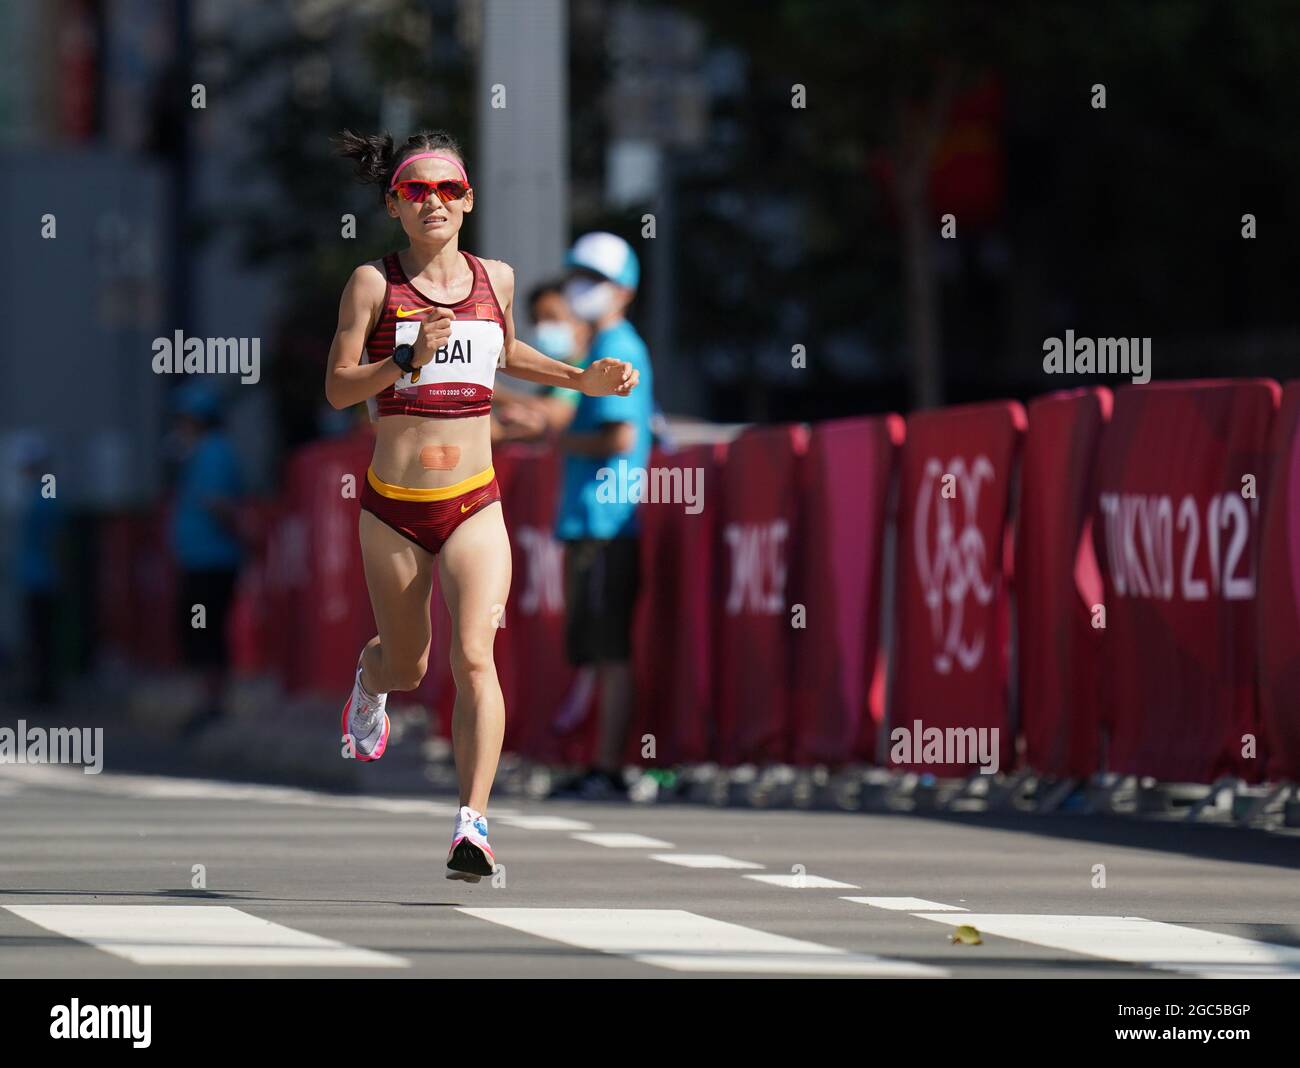 Sapporo, Japan. 7th Aug, 2021. Bai Li of China competes during the women's marathon final at the Tokyo 2020 Olympic Games in Sapporo, Japan, Aug. 7, 2021. Credit: Ju Huanzong/Xinhua/Alamy Live News Stock Photo